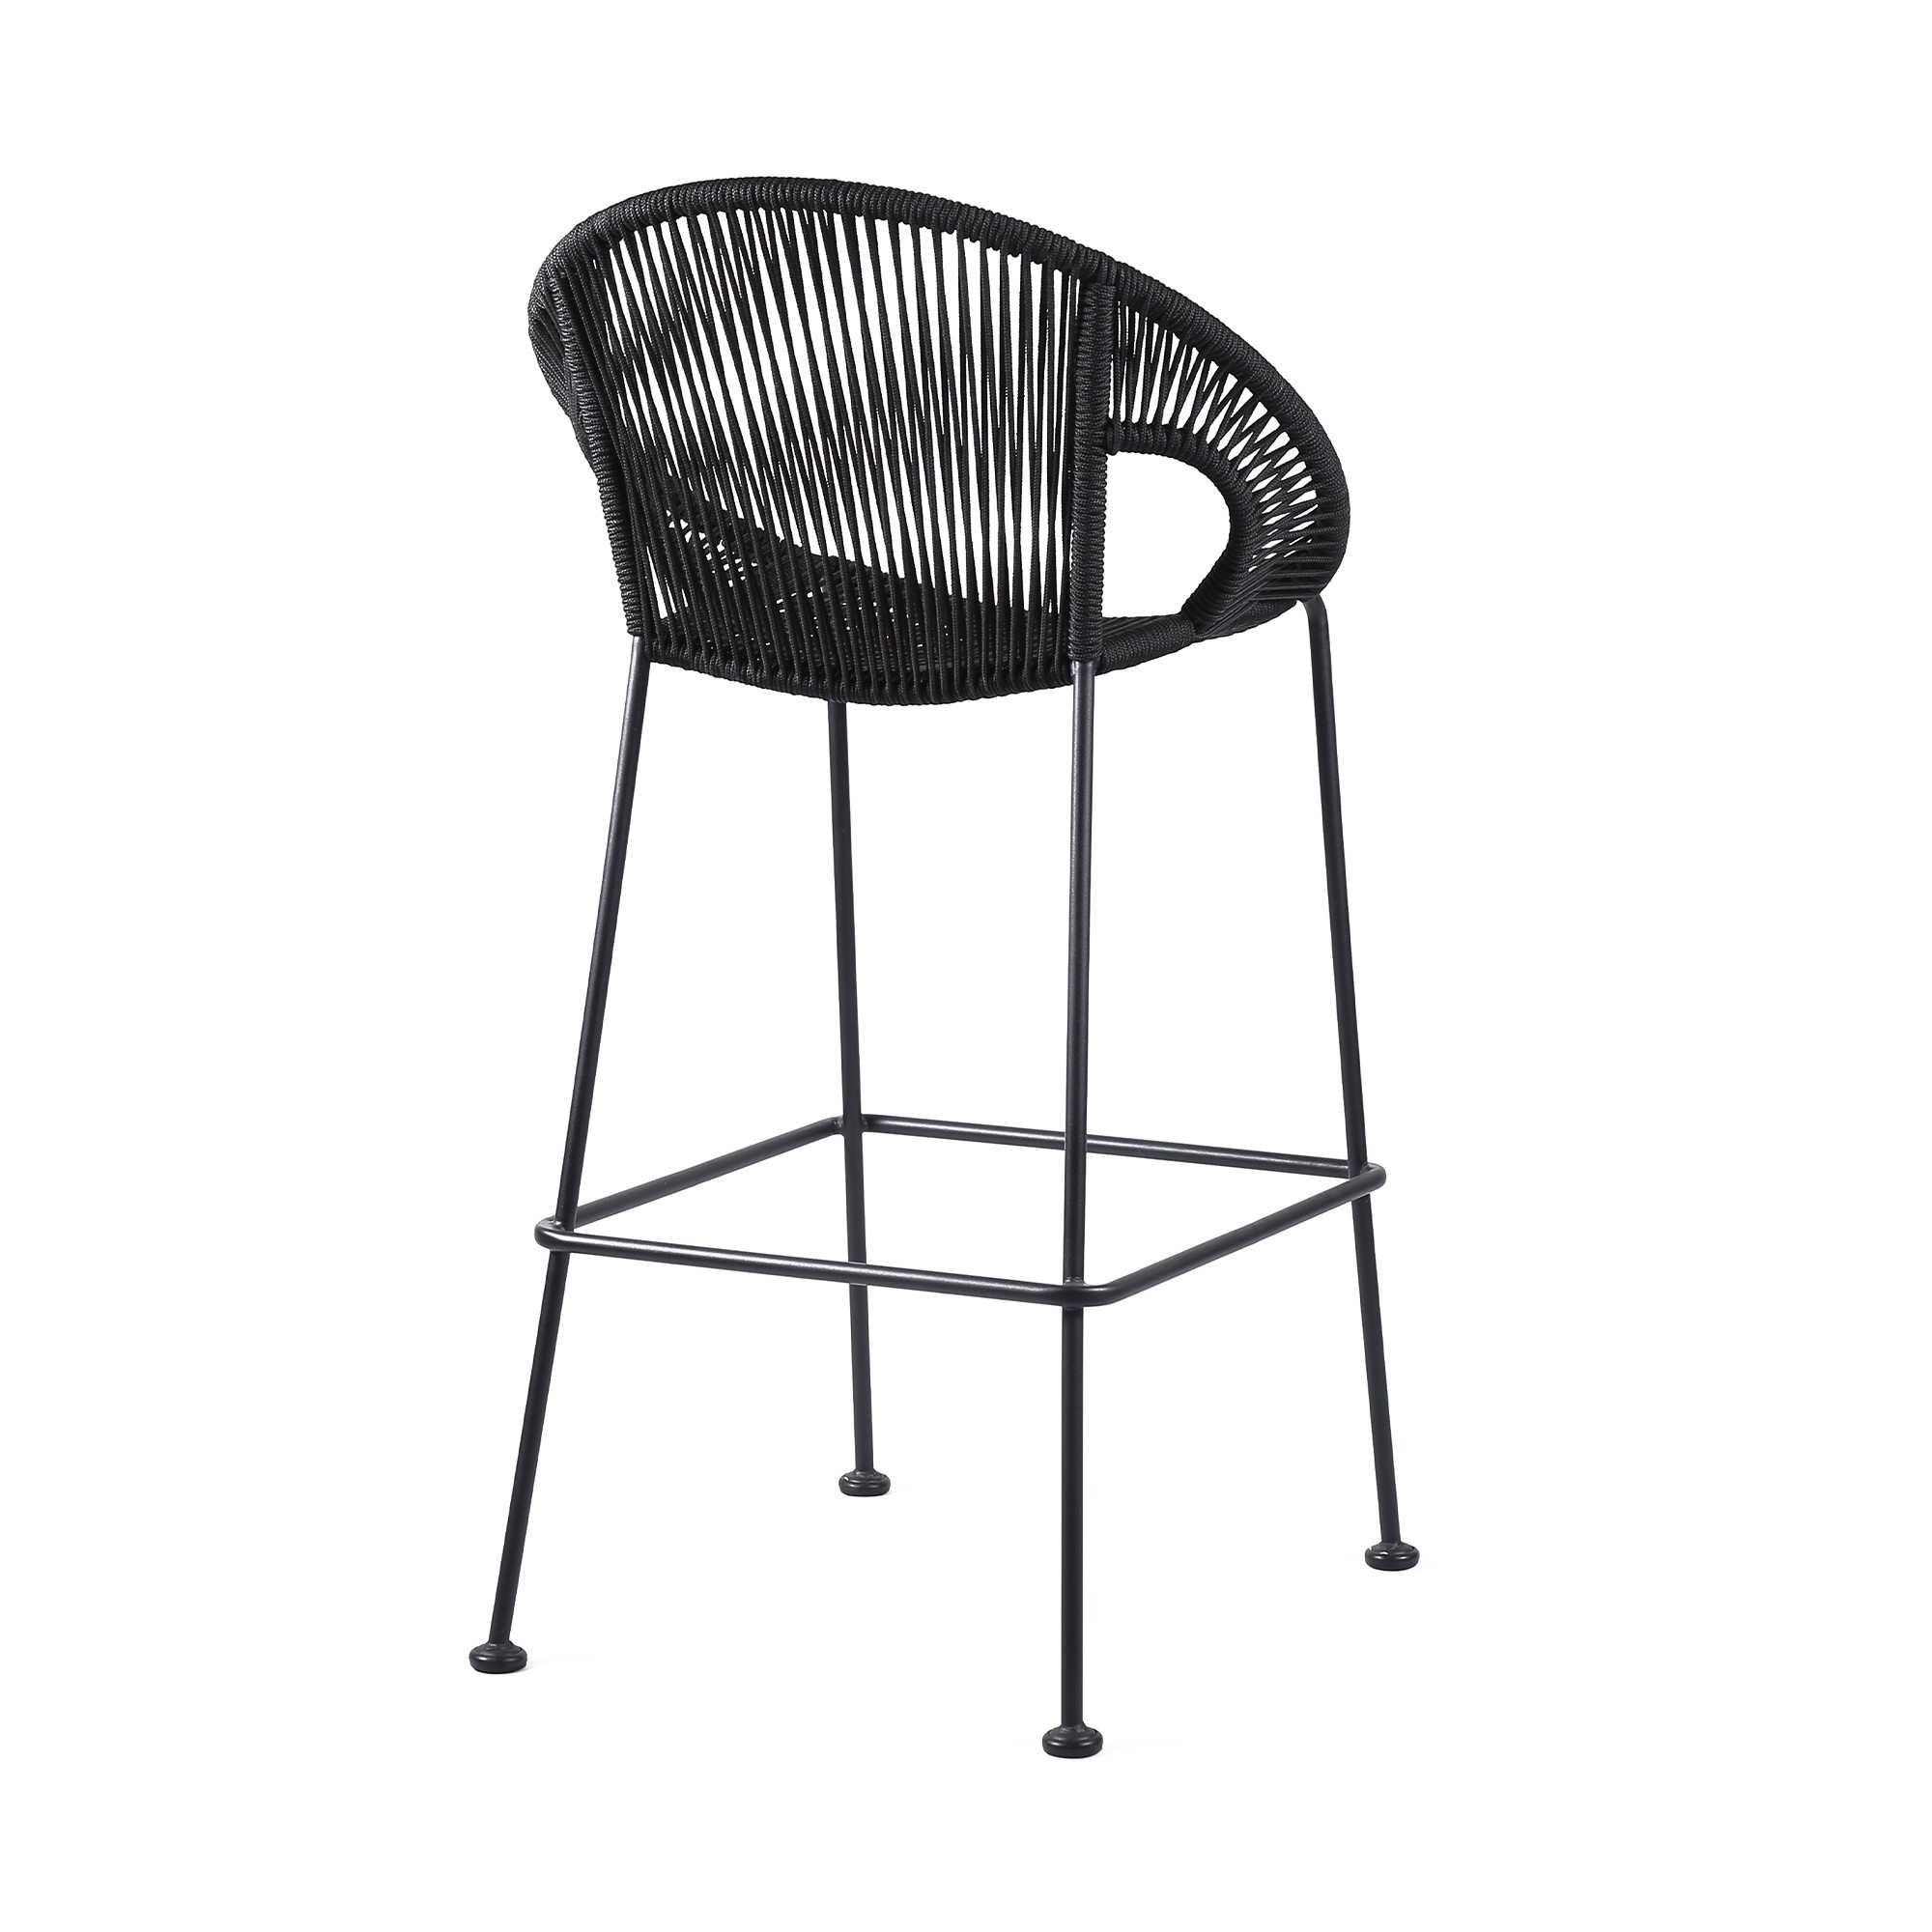 30 Inch Indoor Outdoor Bar Stool With Rounded Rope Woven Seat, Black- Saltoro Sherpi